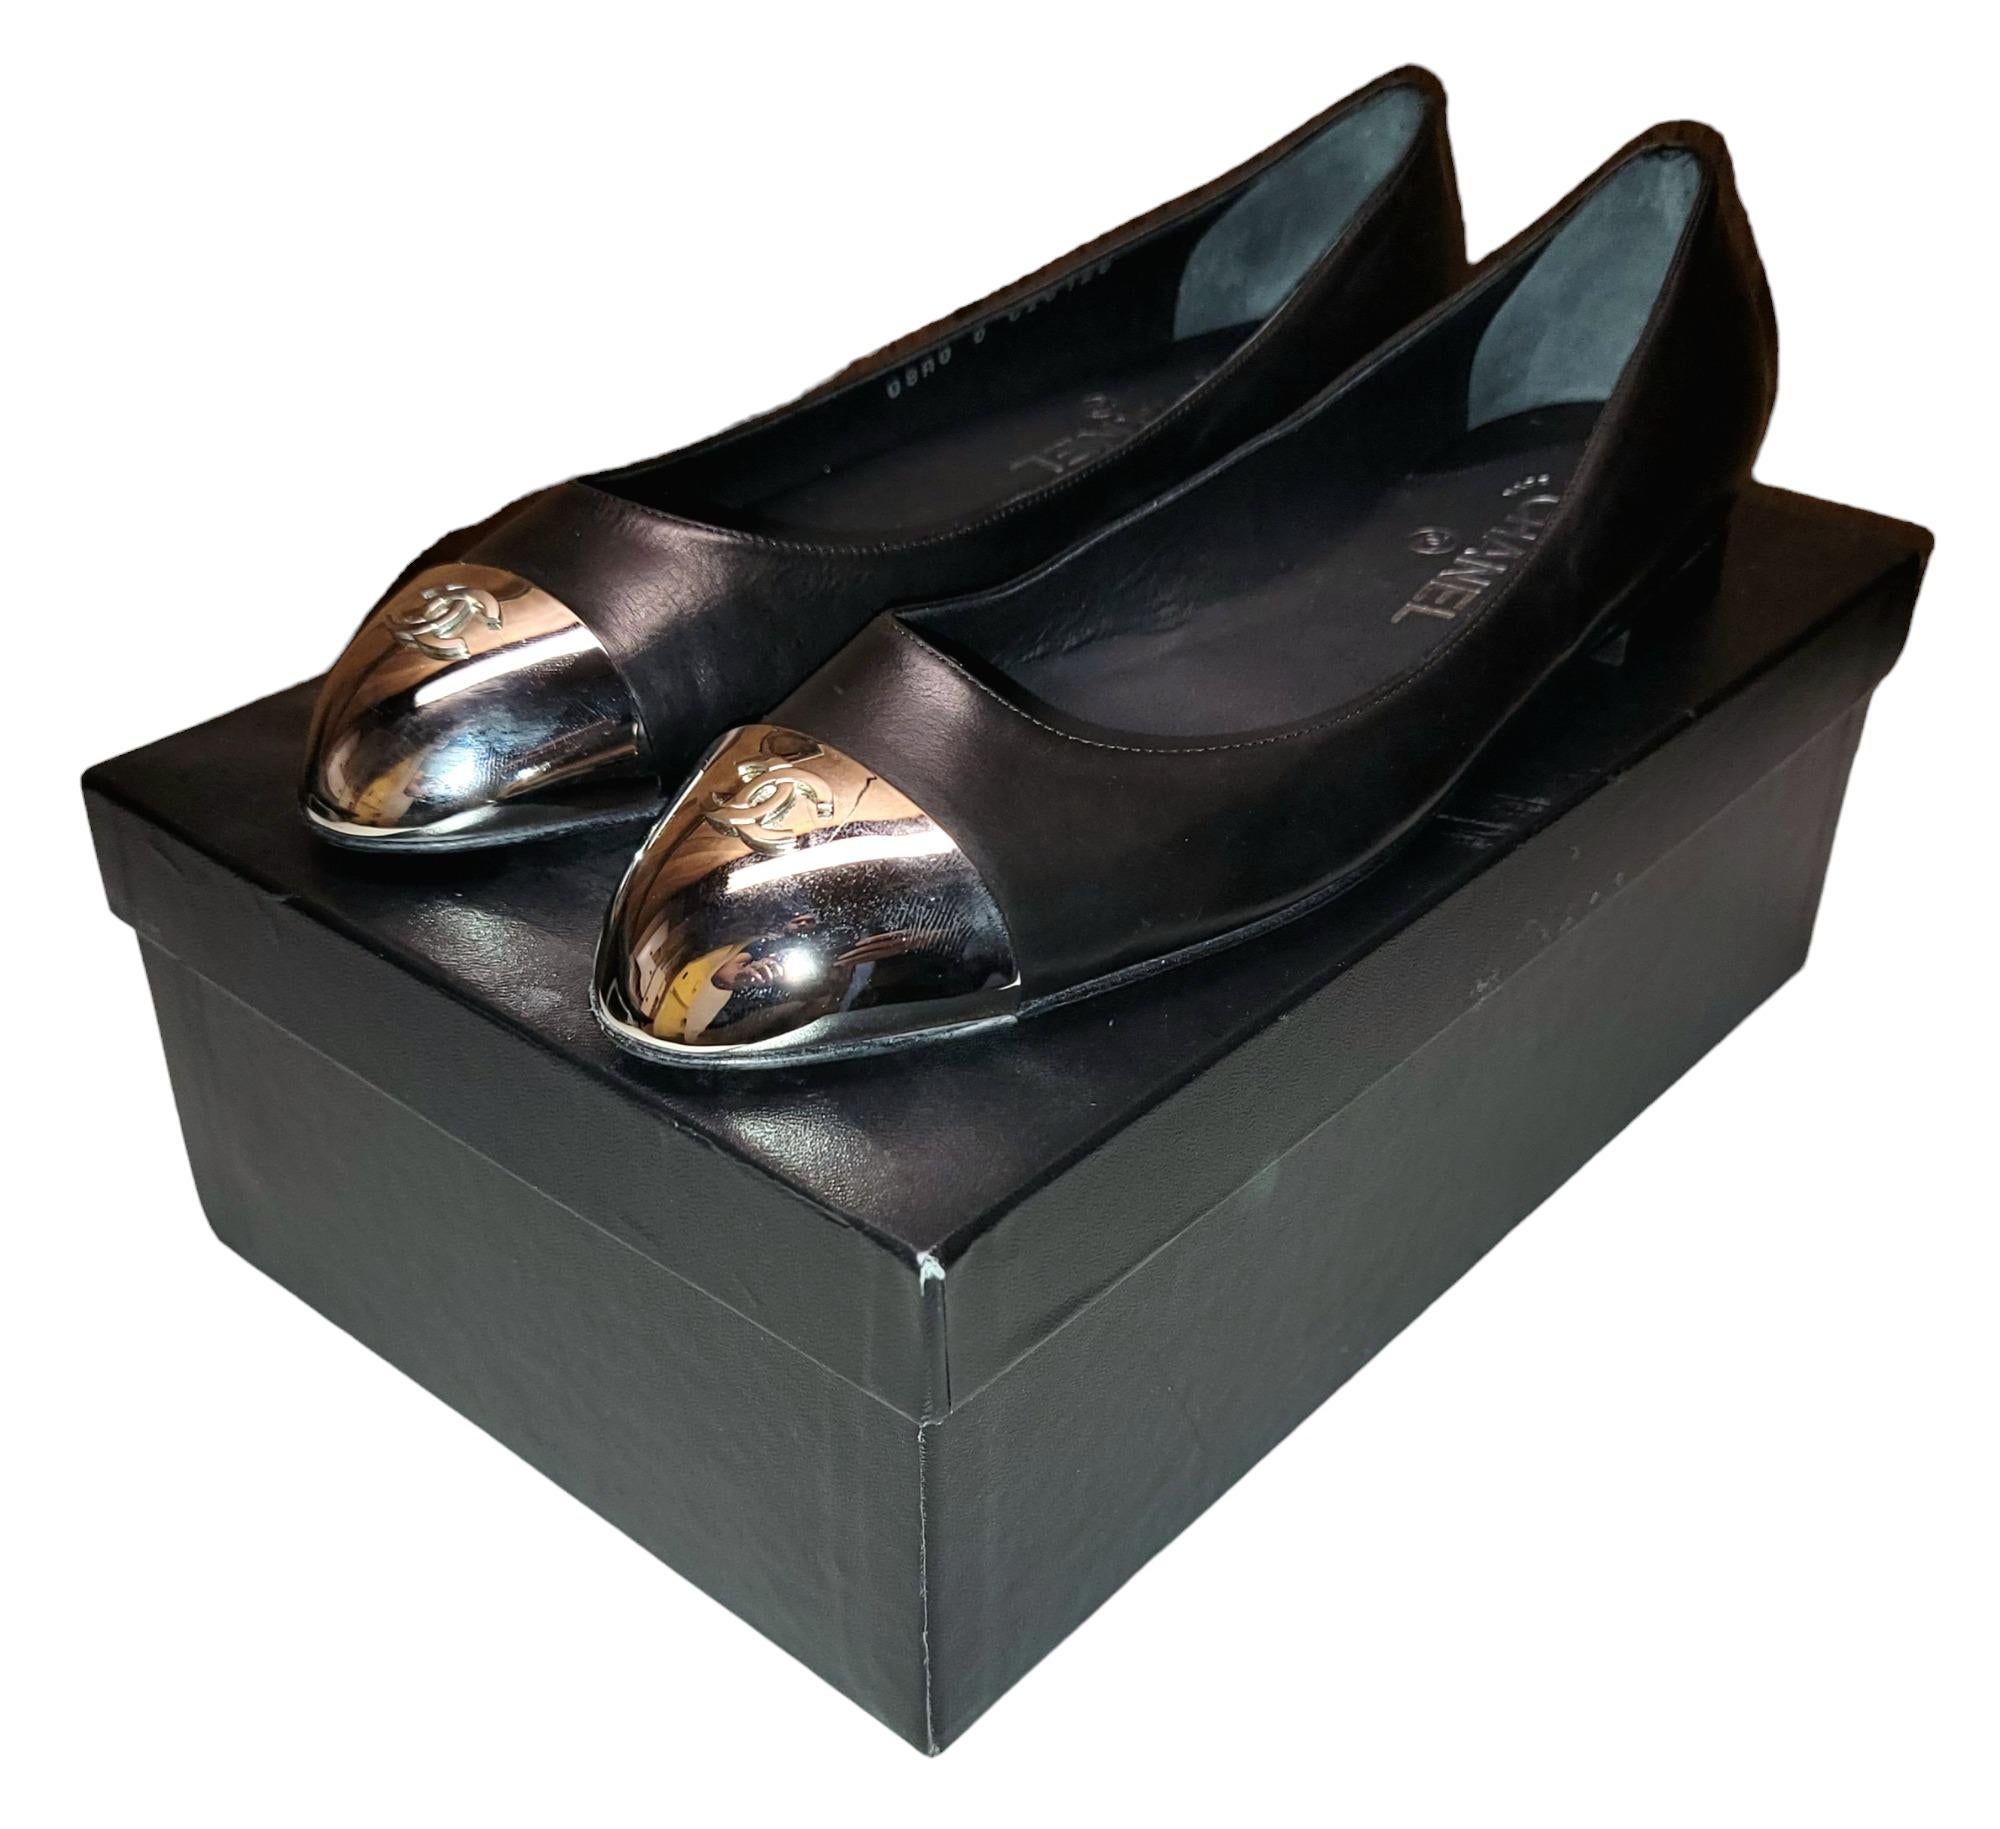 Rare Barnd New Ballerina Shoes With CC Chrome Accent In New Condition For Sale In Pasadena, CA